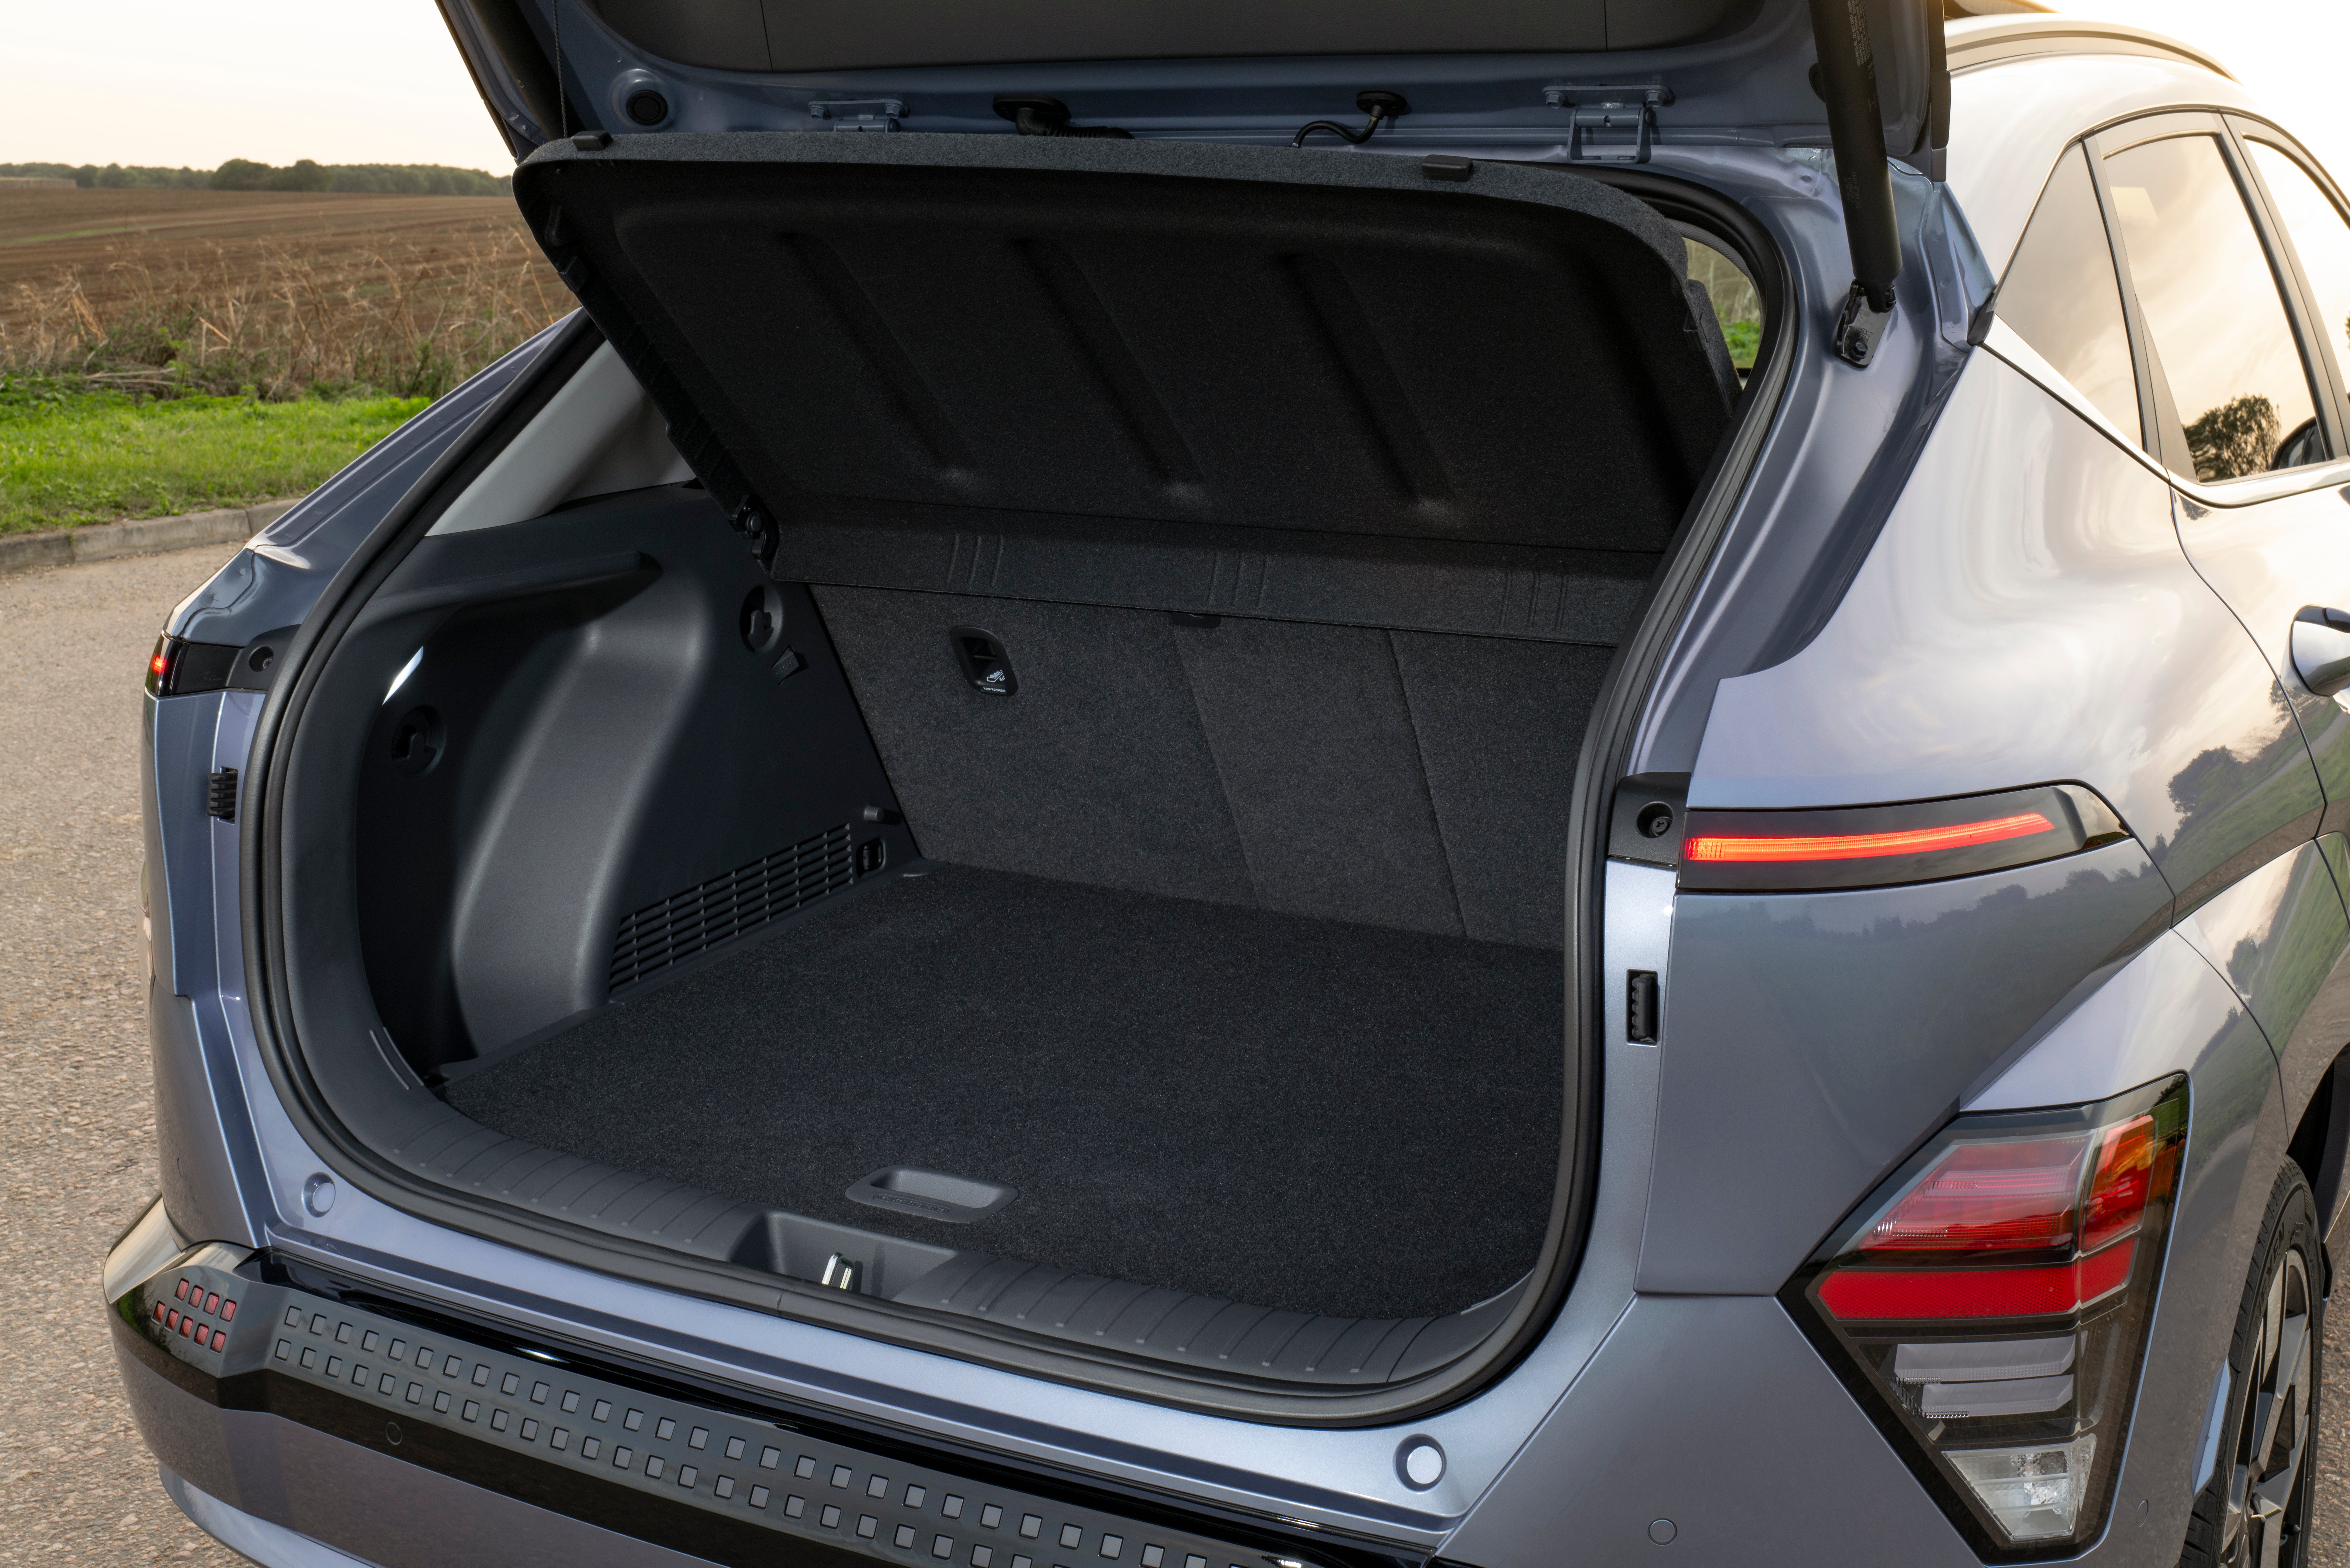 As the new Kona is bigger than its predecessor, the boot space is now even larger